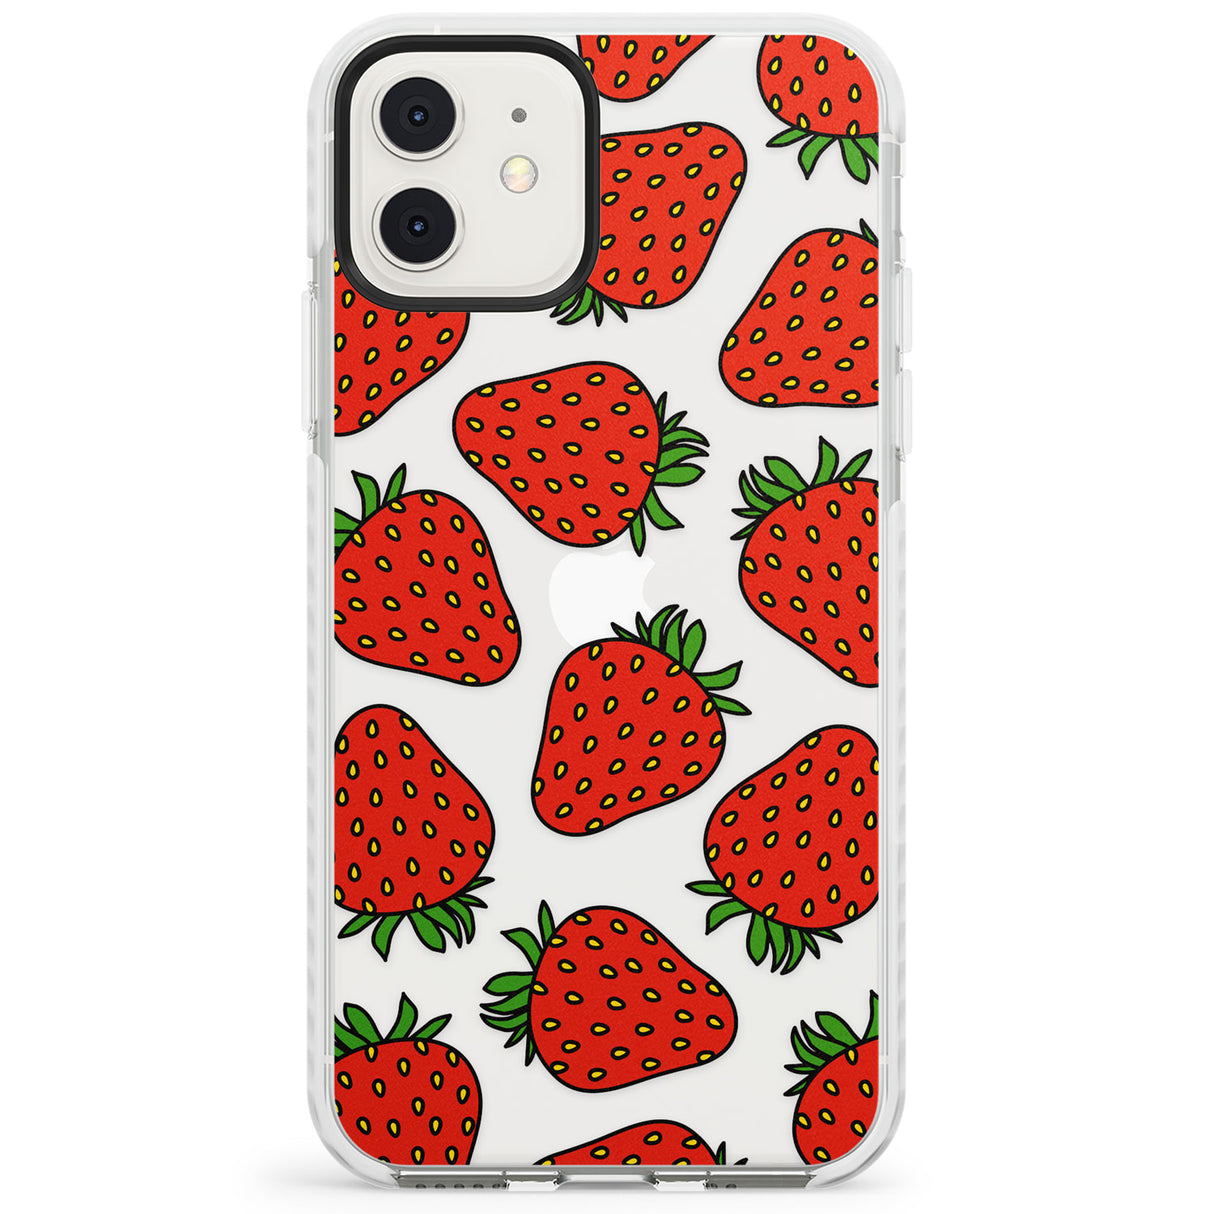 Strawberry Pattern Impact Phone Case for iPhone 11, iphone 12